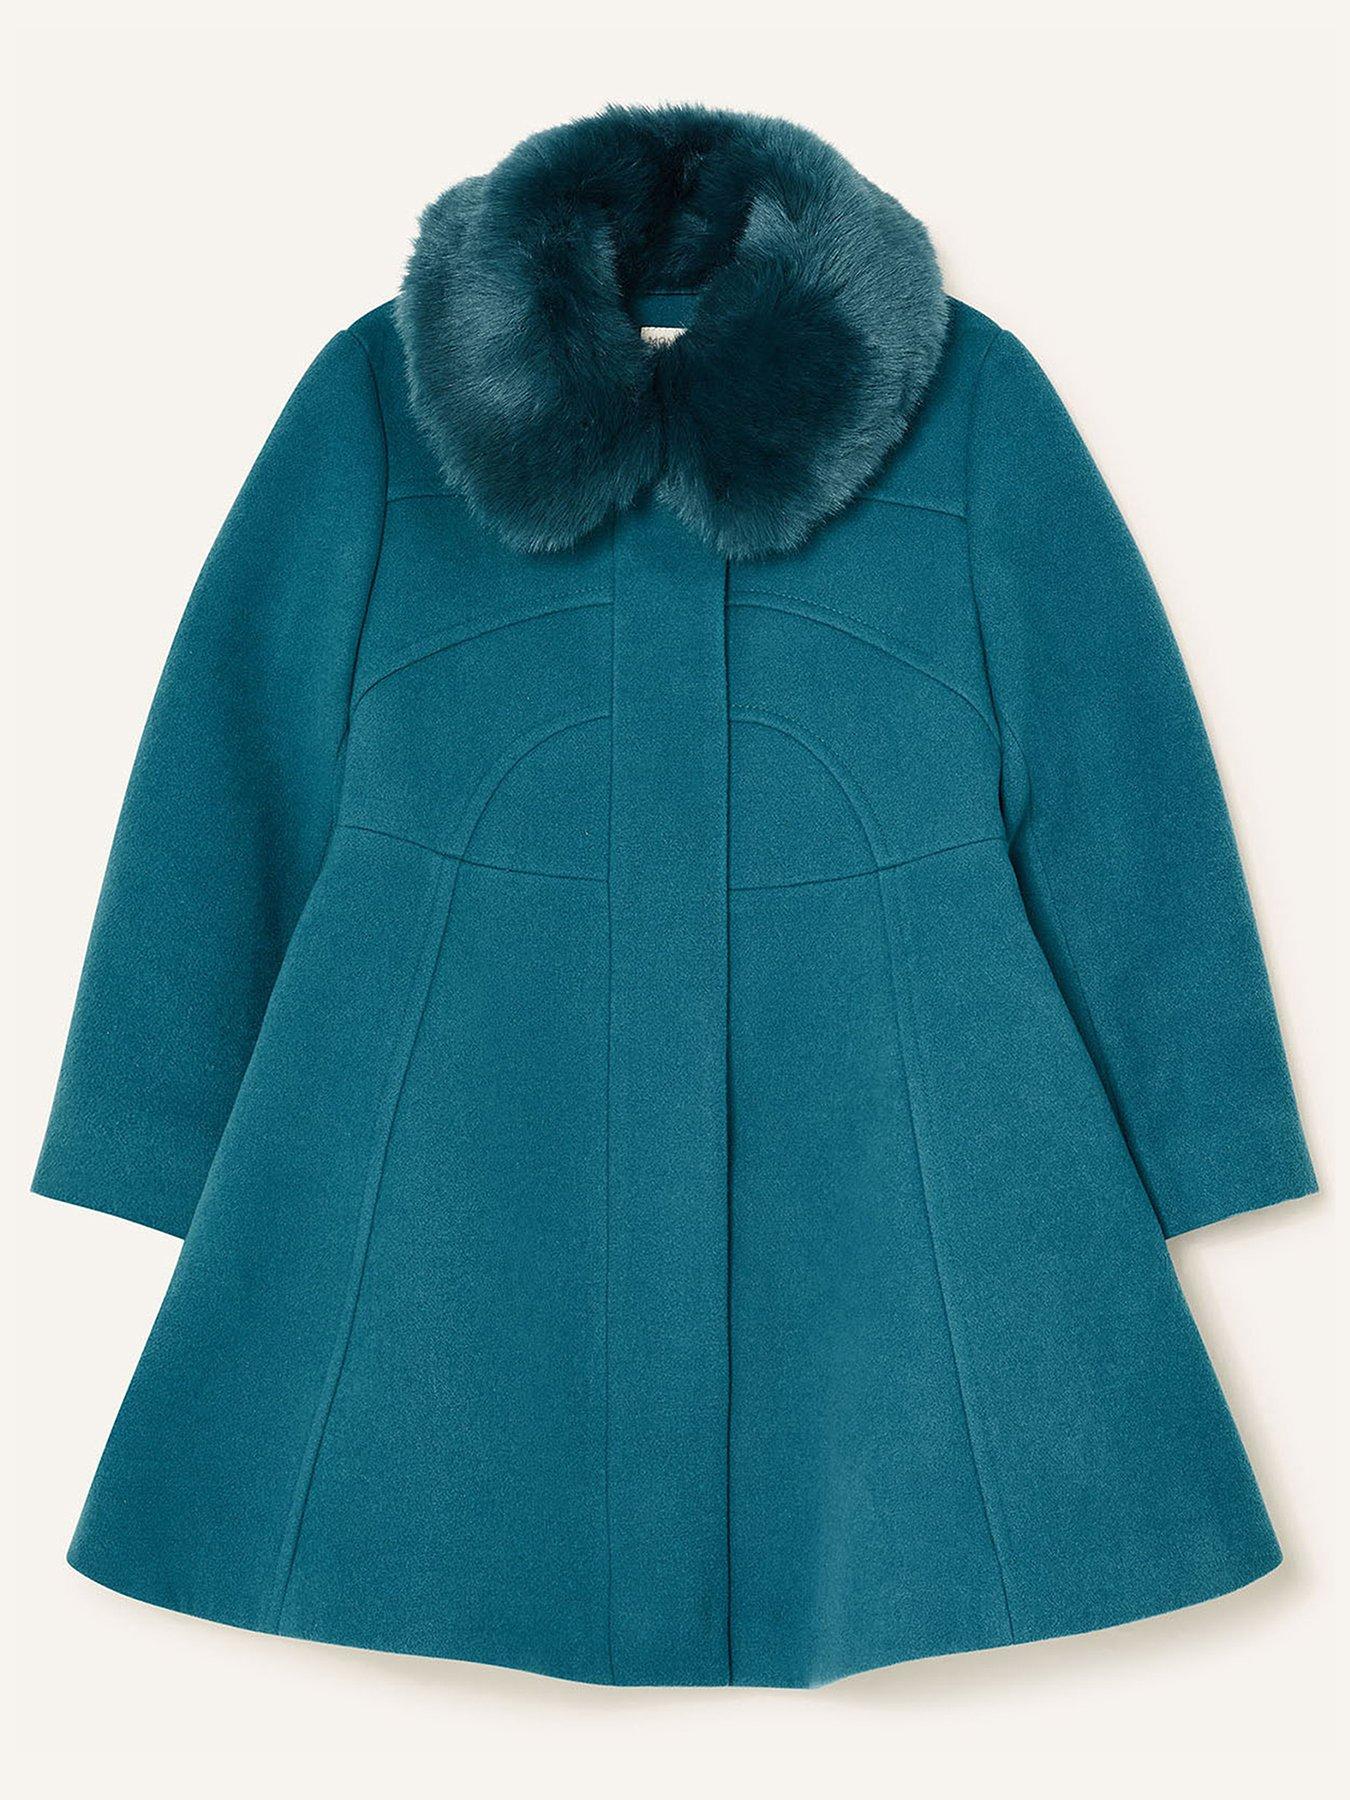 Girls Clothes Girls Seam Detail Skirted Coat - Teal